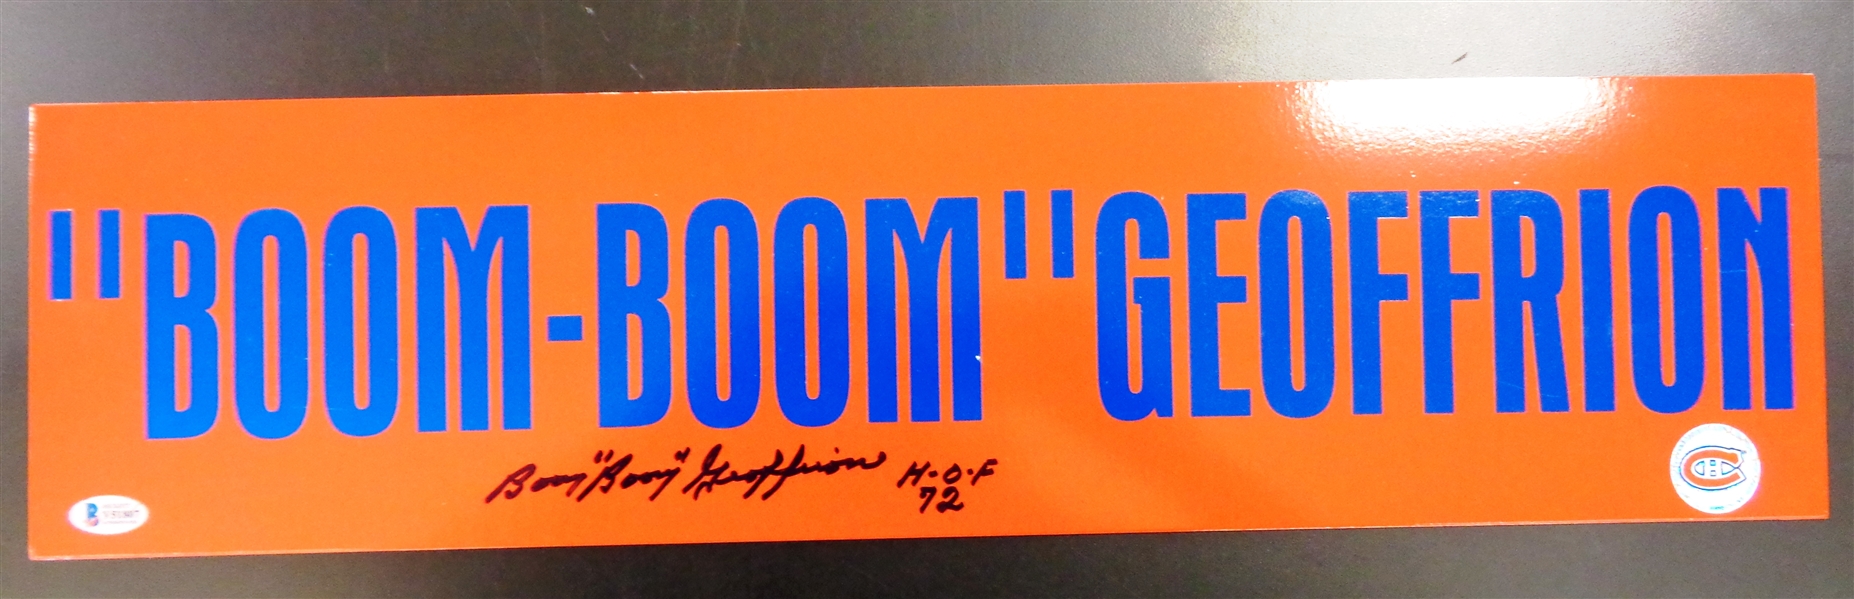 Boom Boom Geoffrion Autographed 6x24 Metal Street Sign